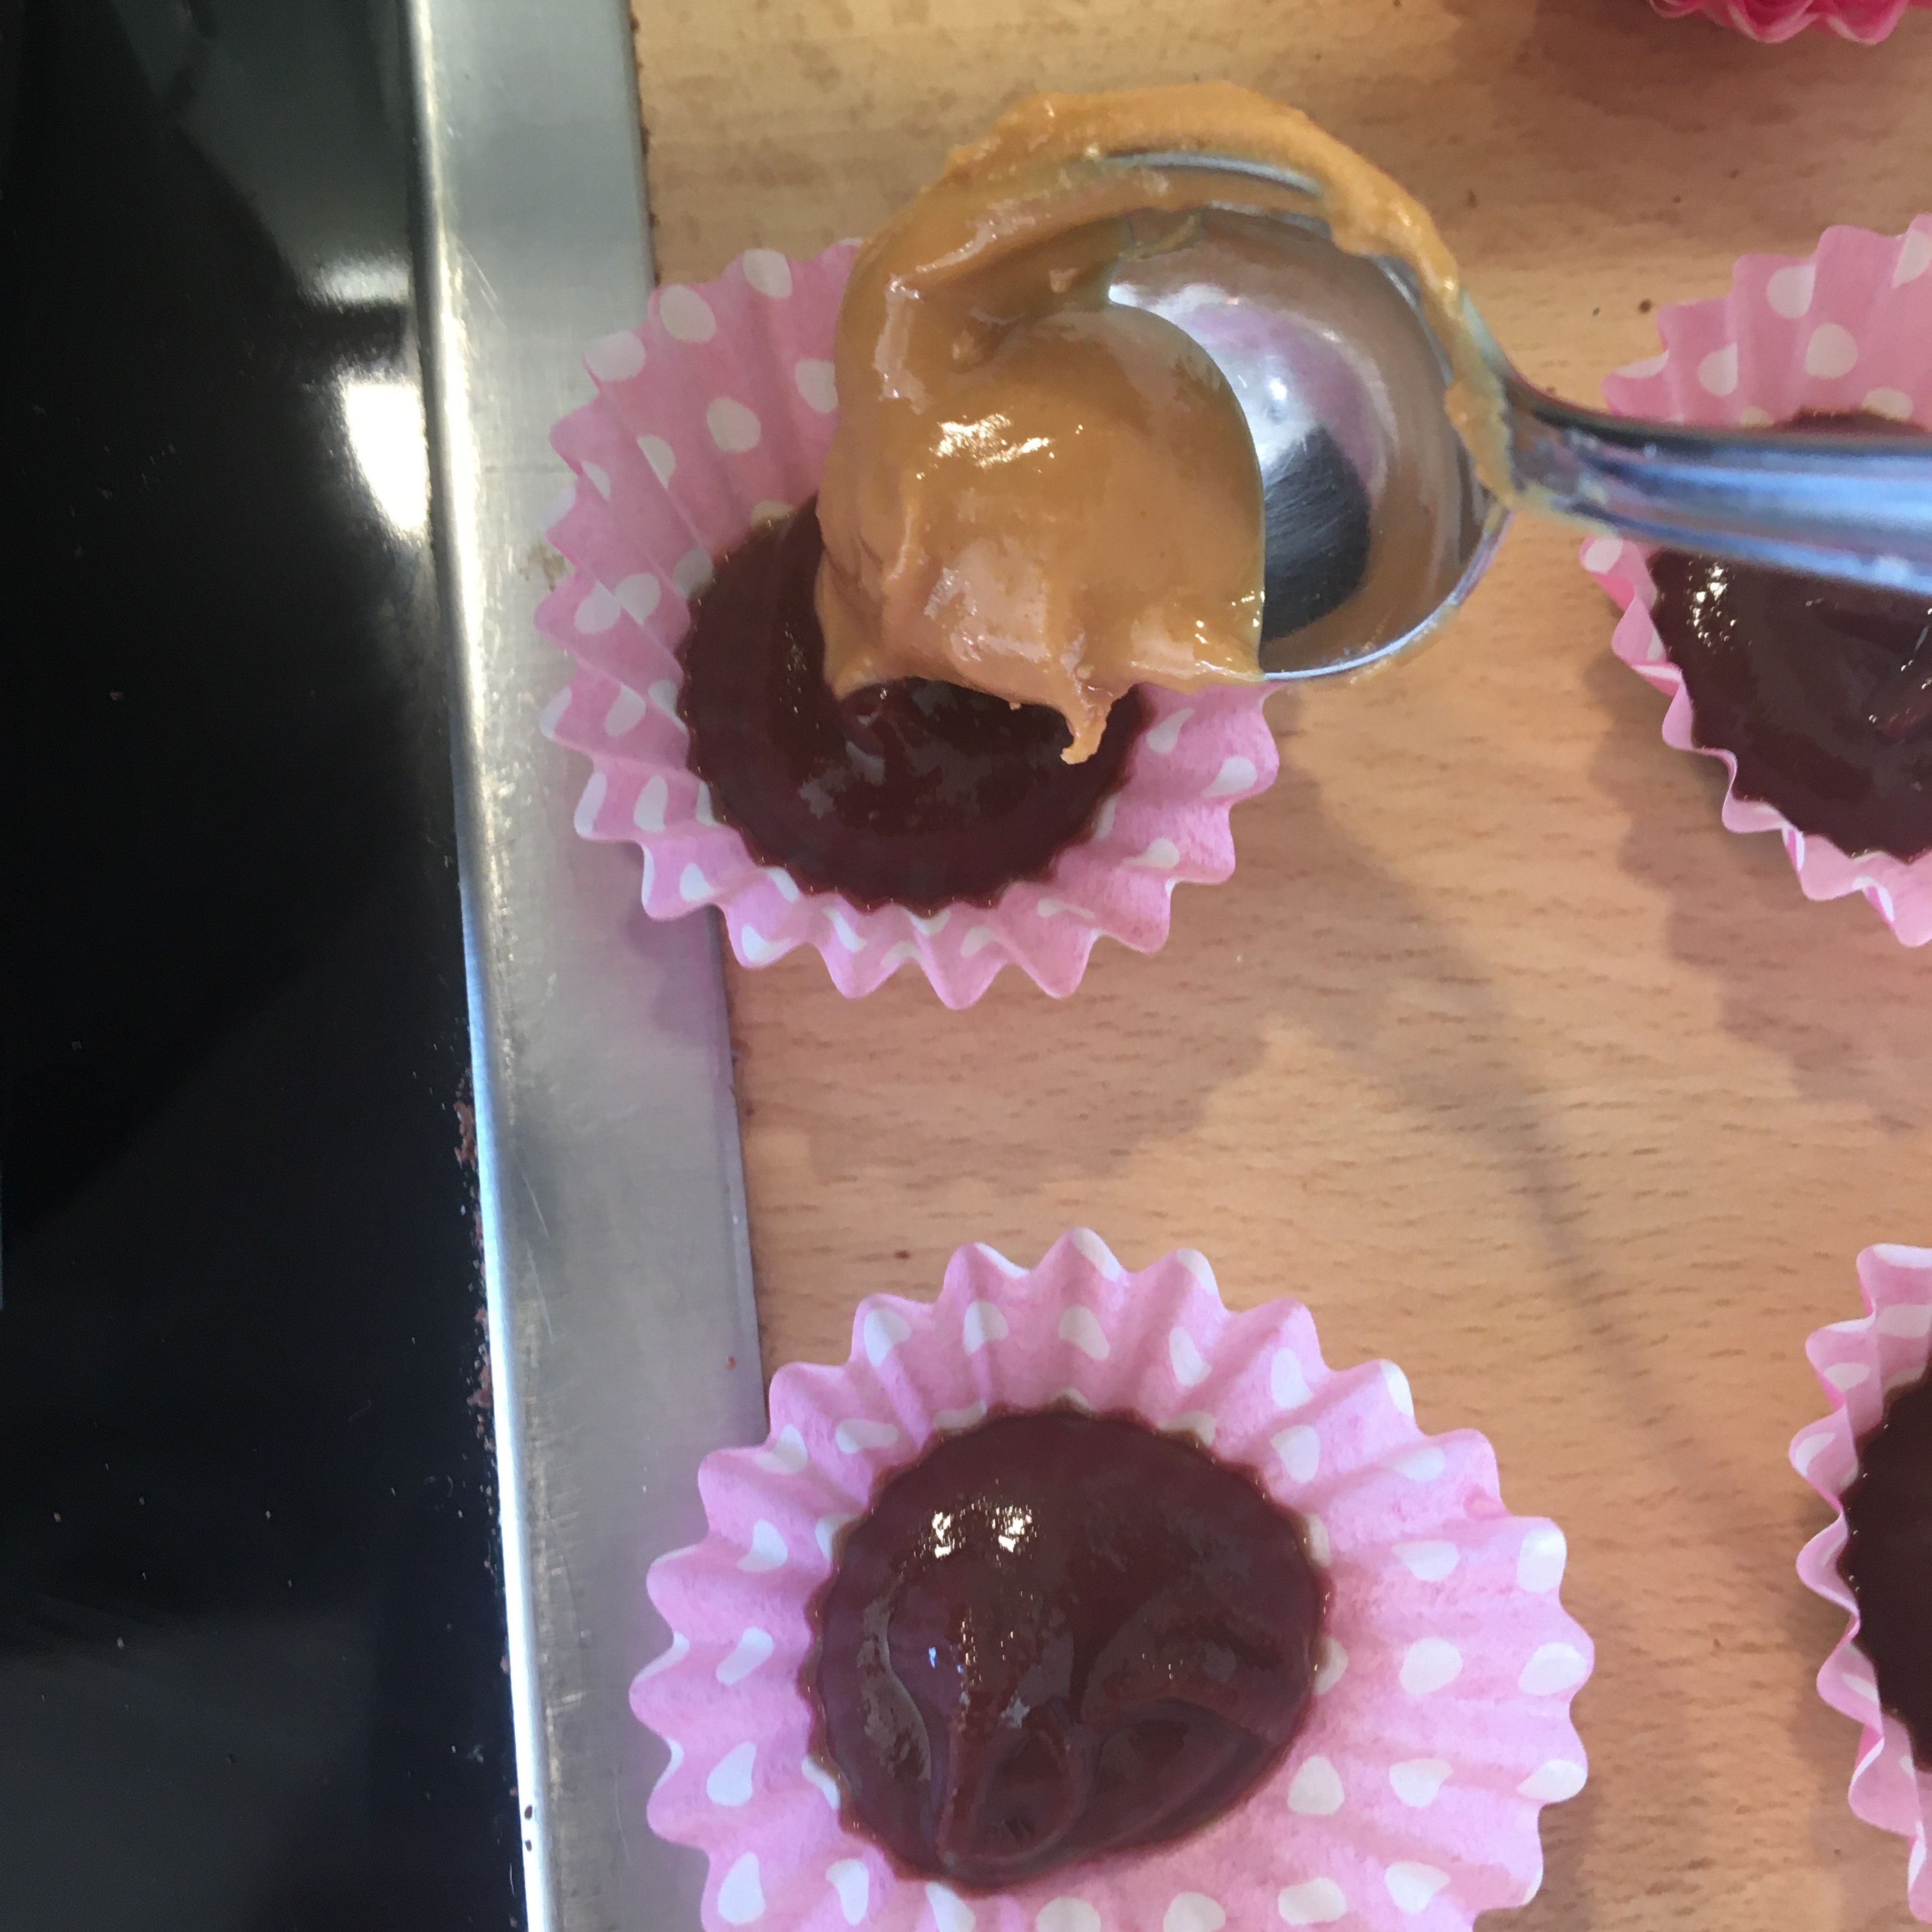 Add half tsp of melted peanut butter